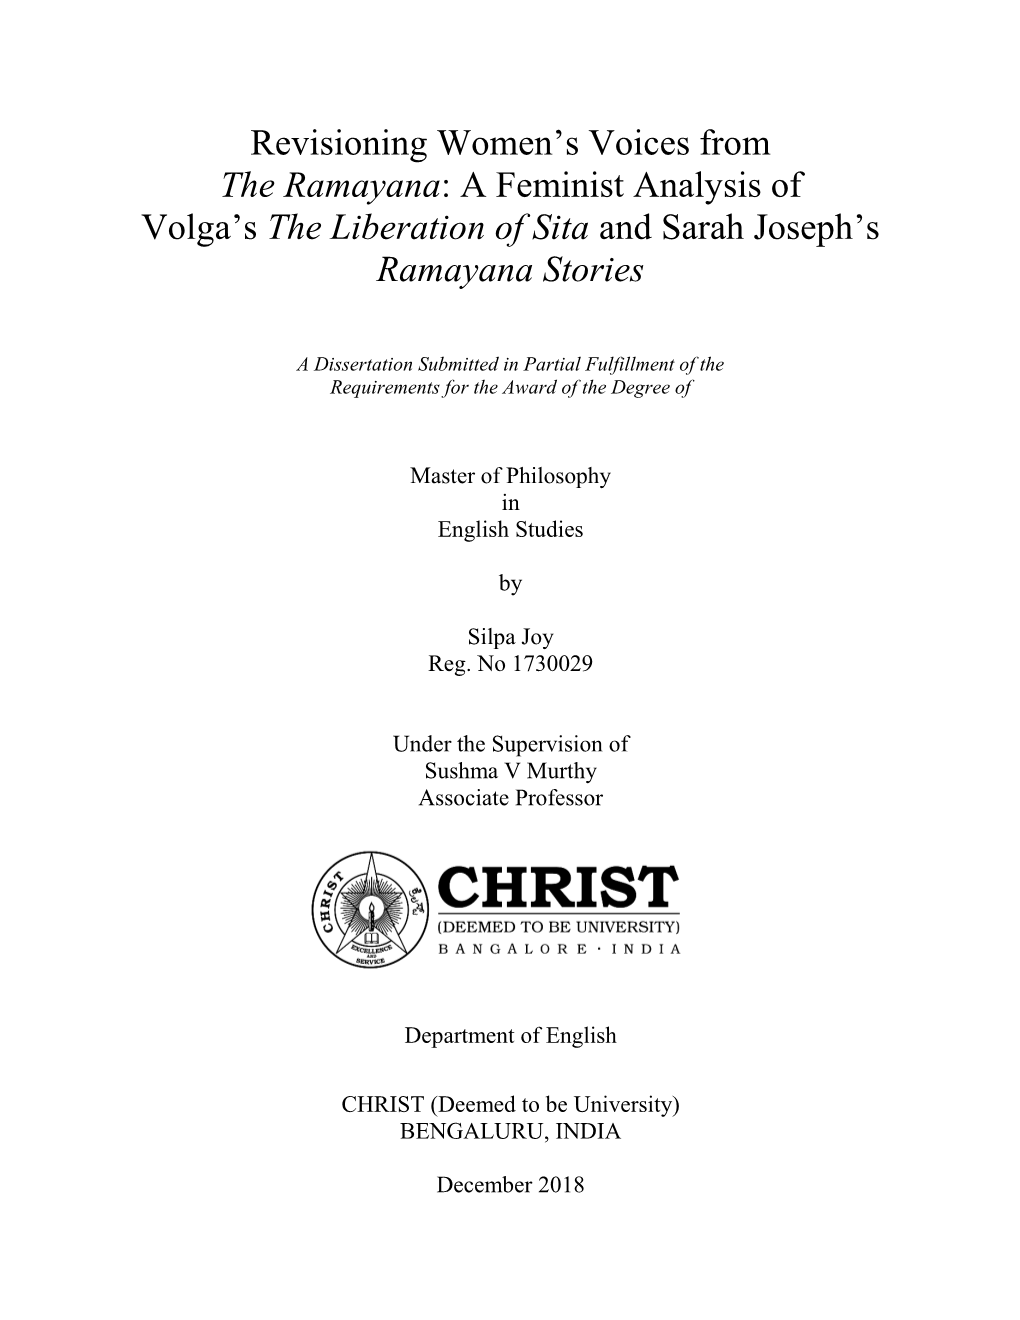 Revisioning Women's Voices from the Ramayana: a Feminist Analysis Of